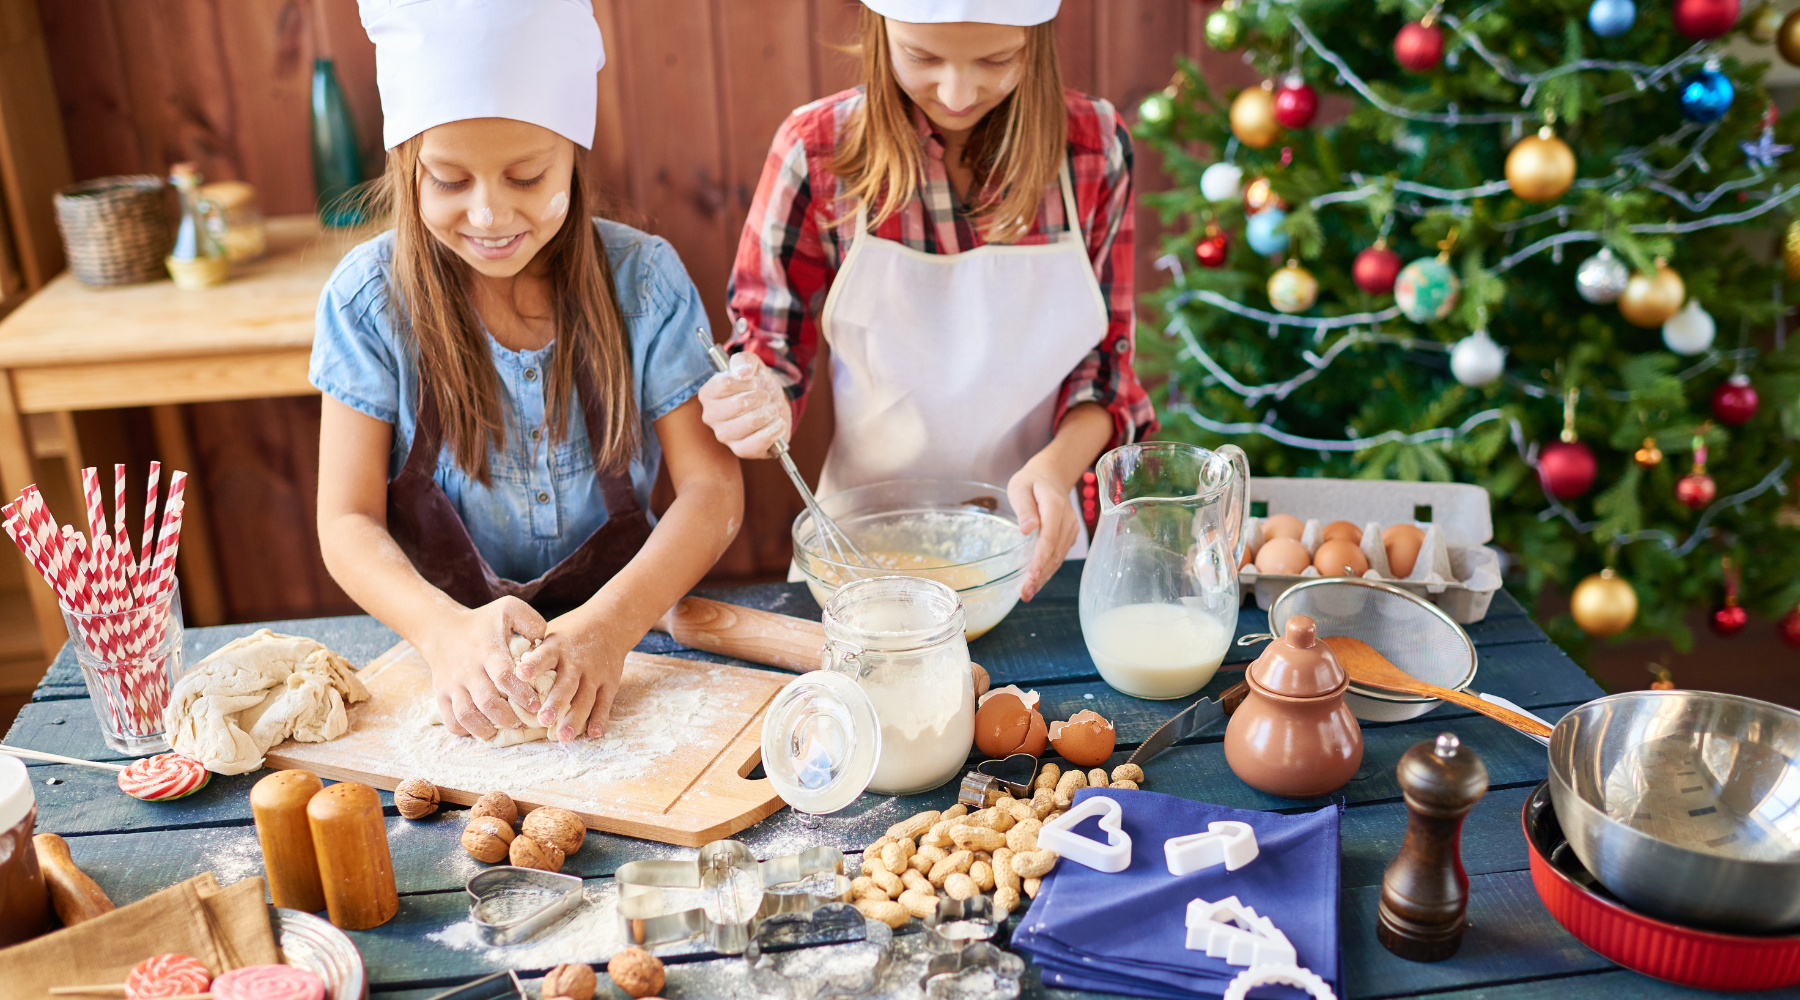 FUN FAMILY-FRIENDLY ACTIVITIES FOR THE HOLIDAYS